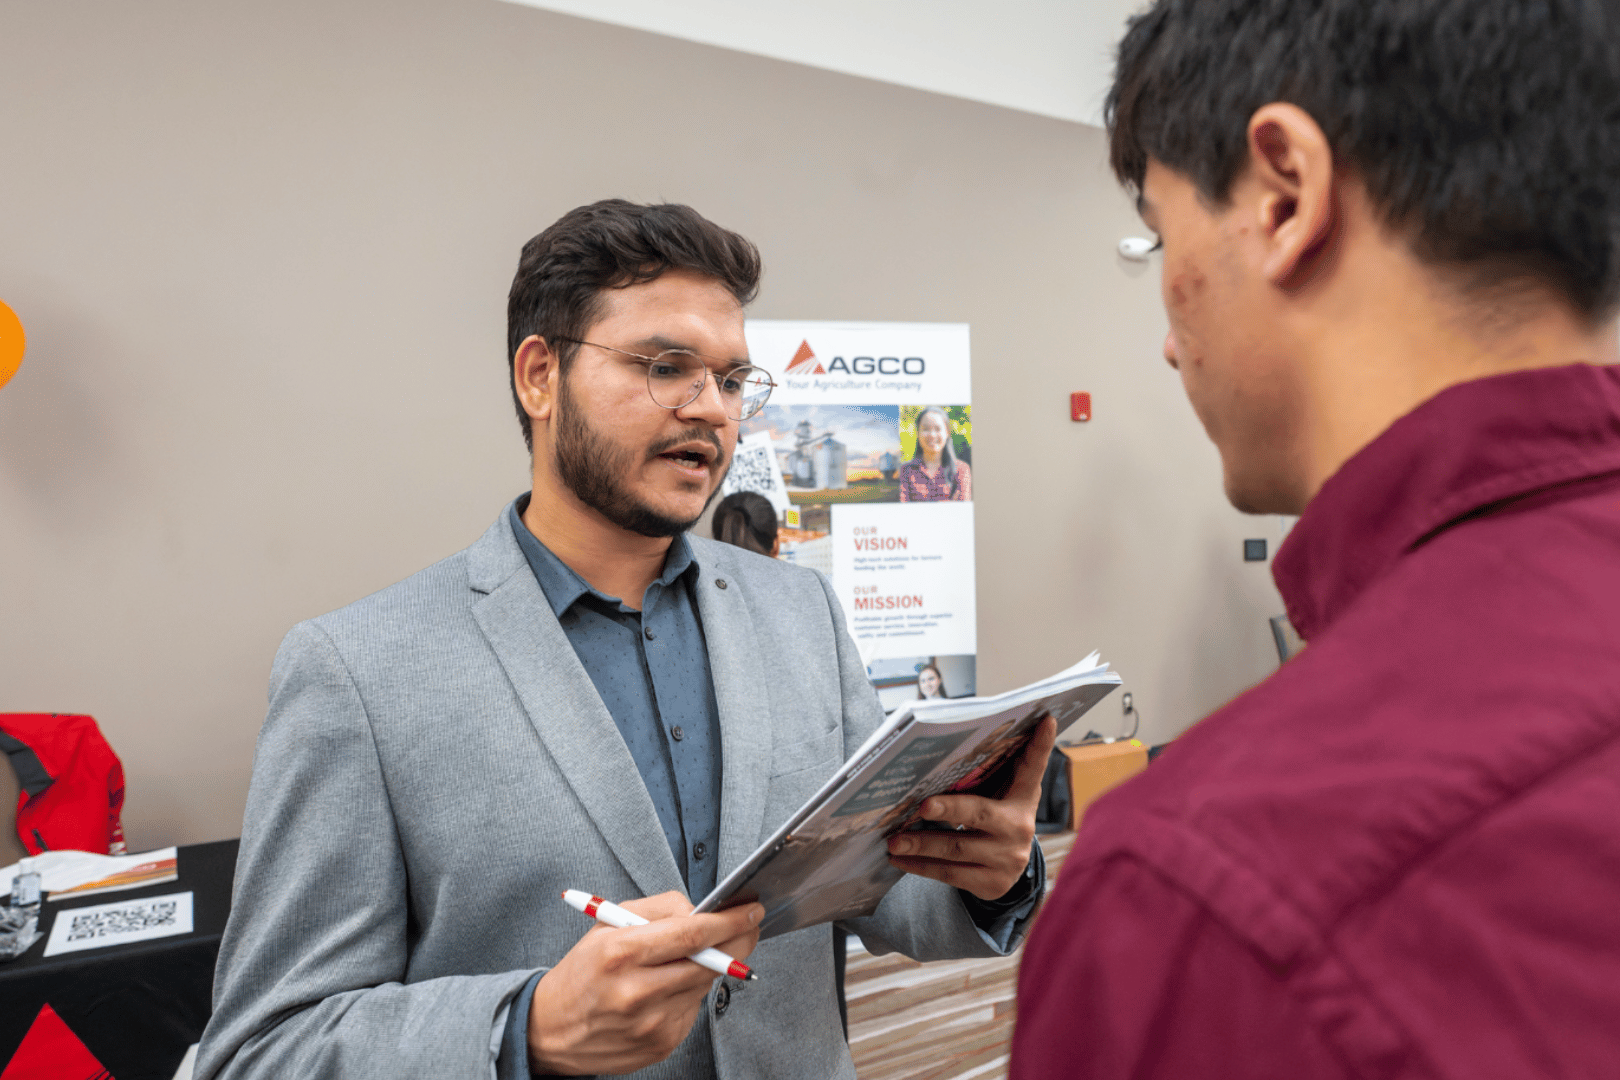 AGCO recruiter reviewing student resume